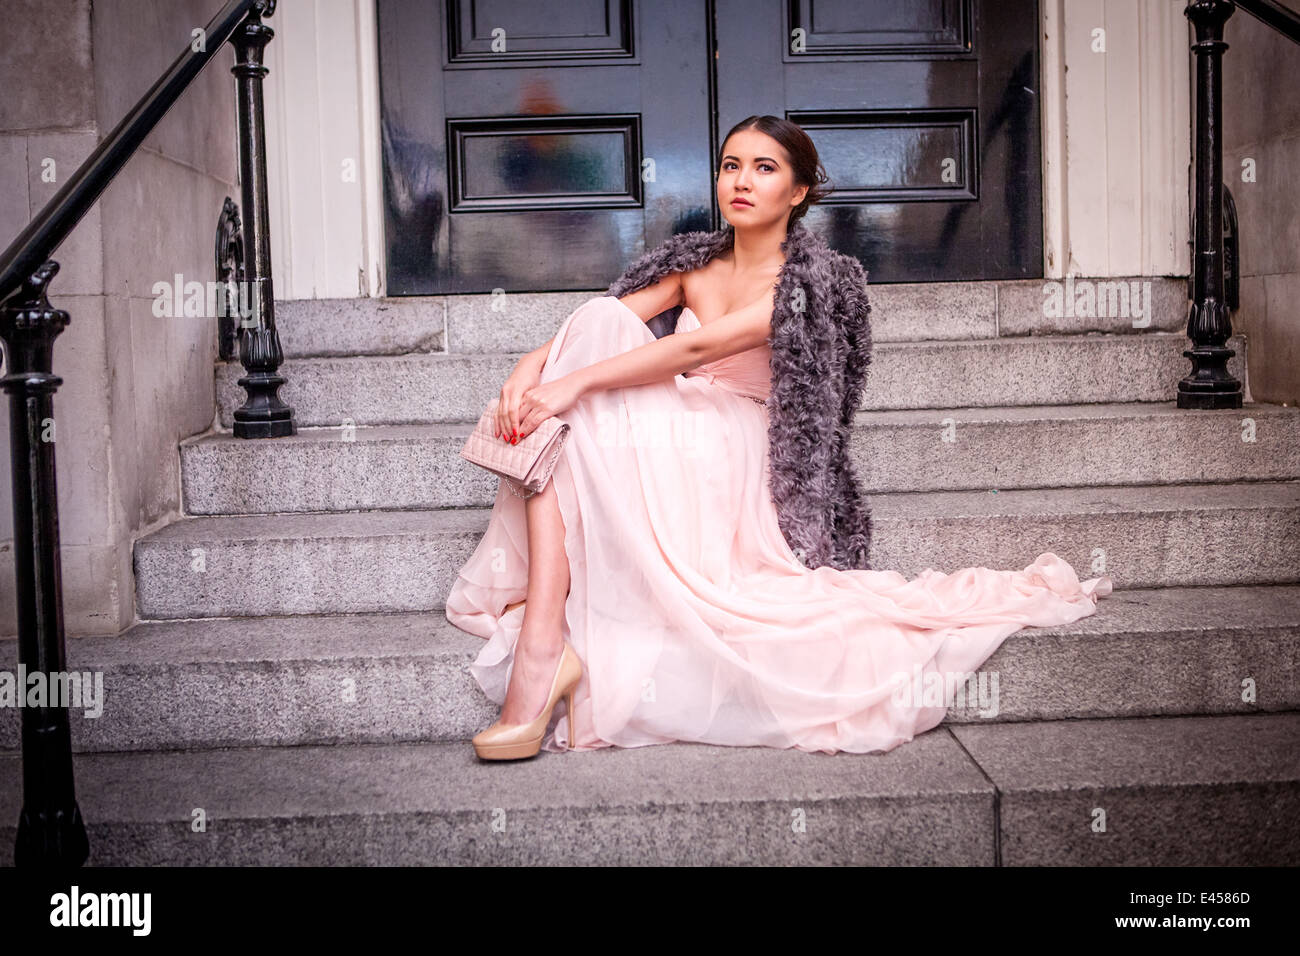 Portrait of young woman in evening gown sitting on steps Stock Photo